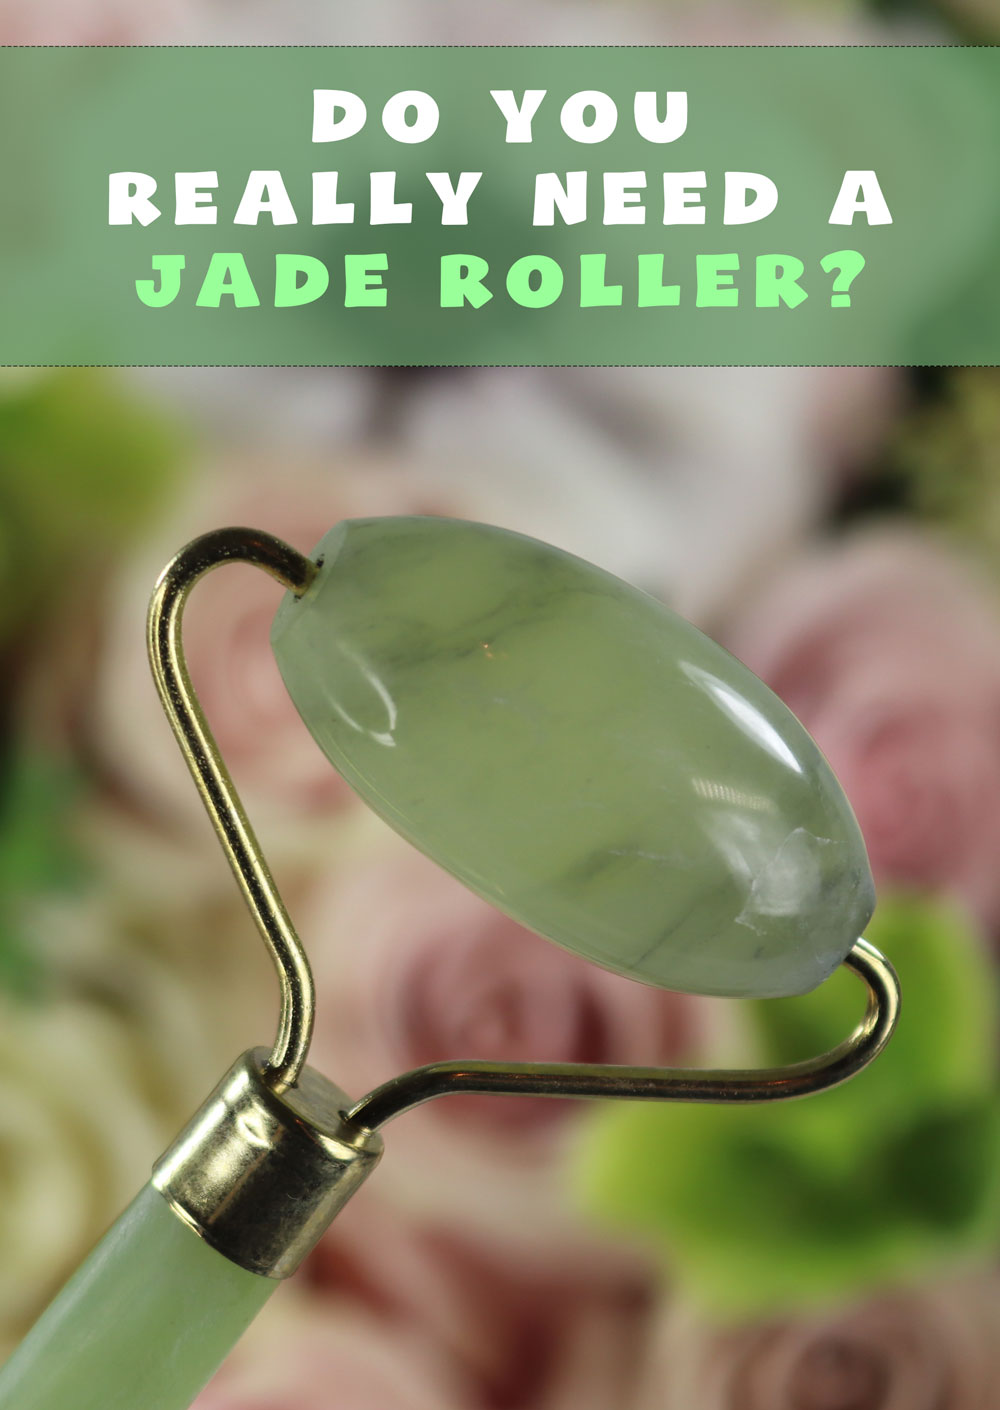 Do you really need a jade roller?